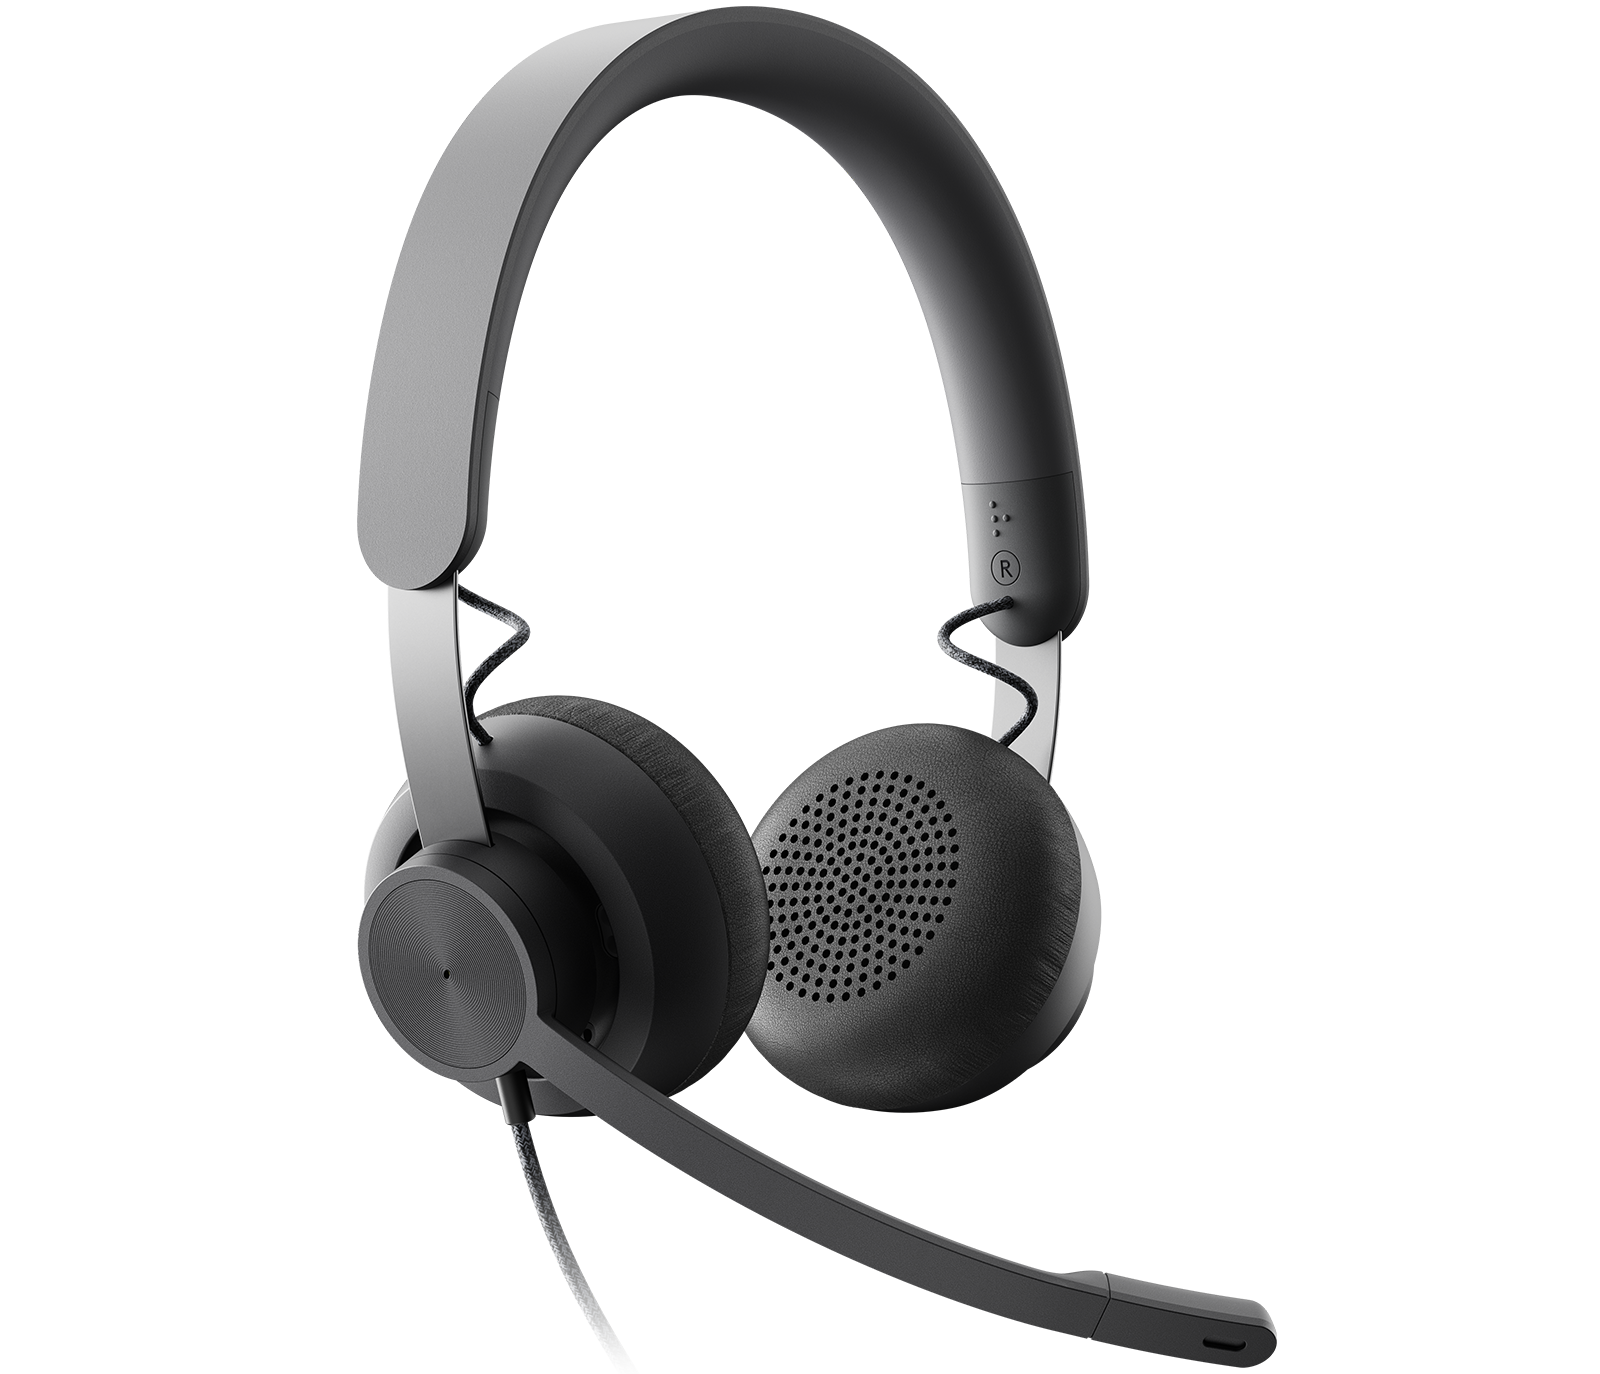 Logitech headset software download 7 steps to health pdf free download